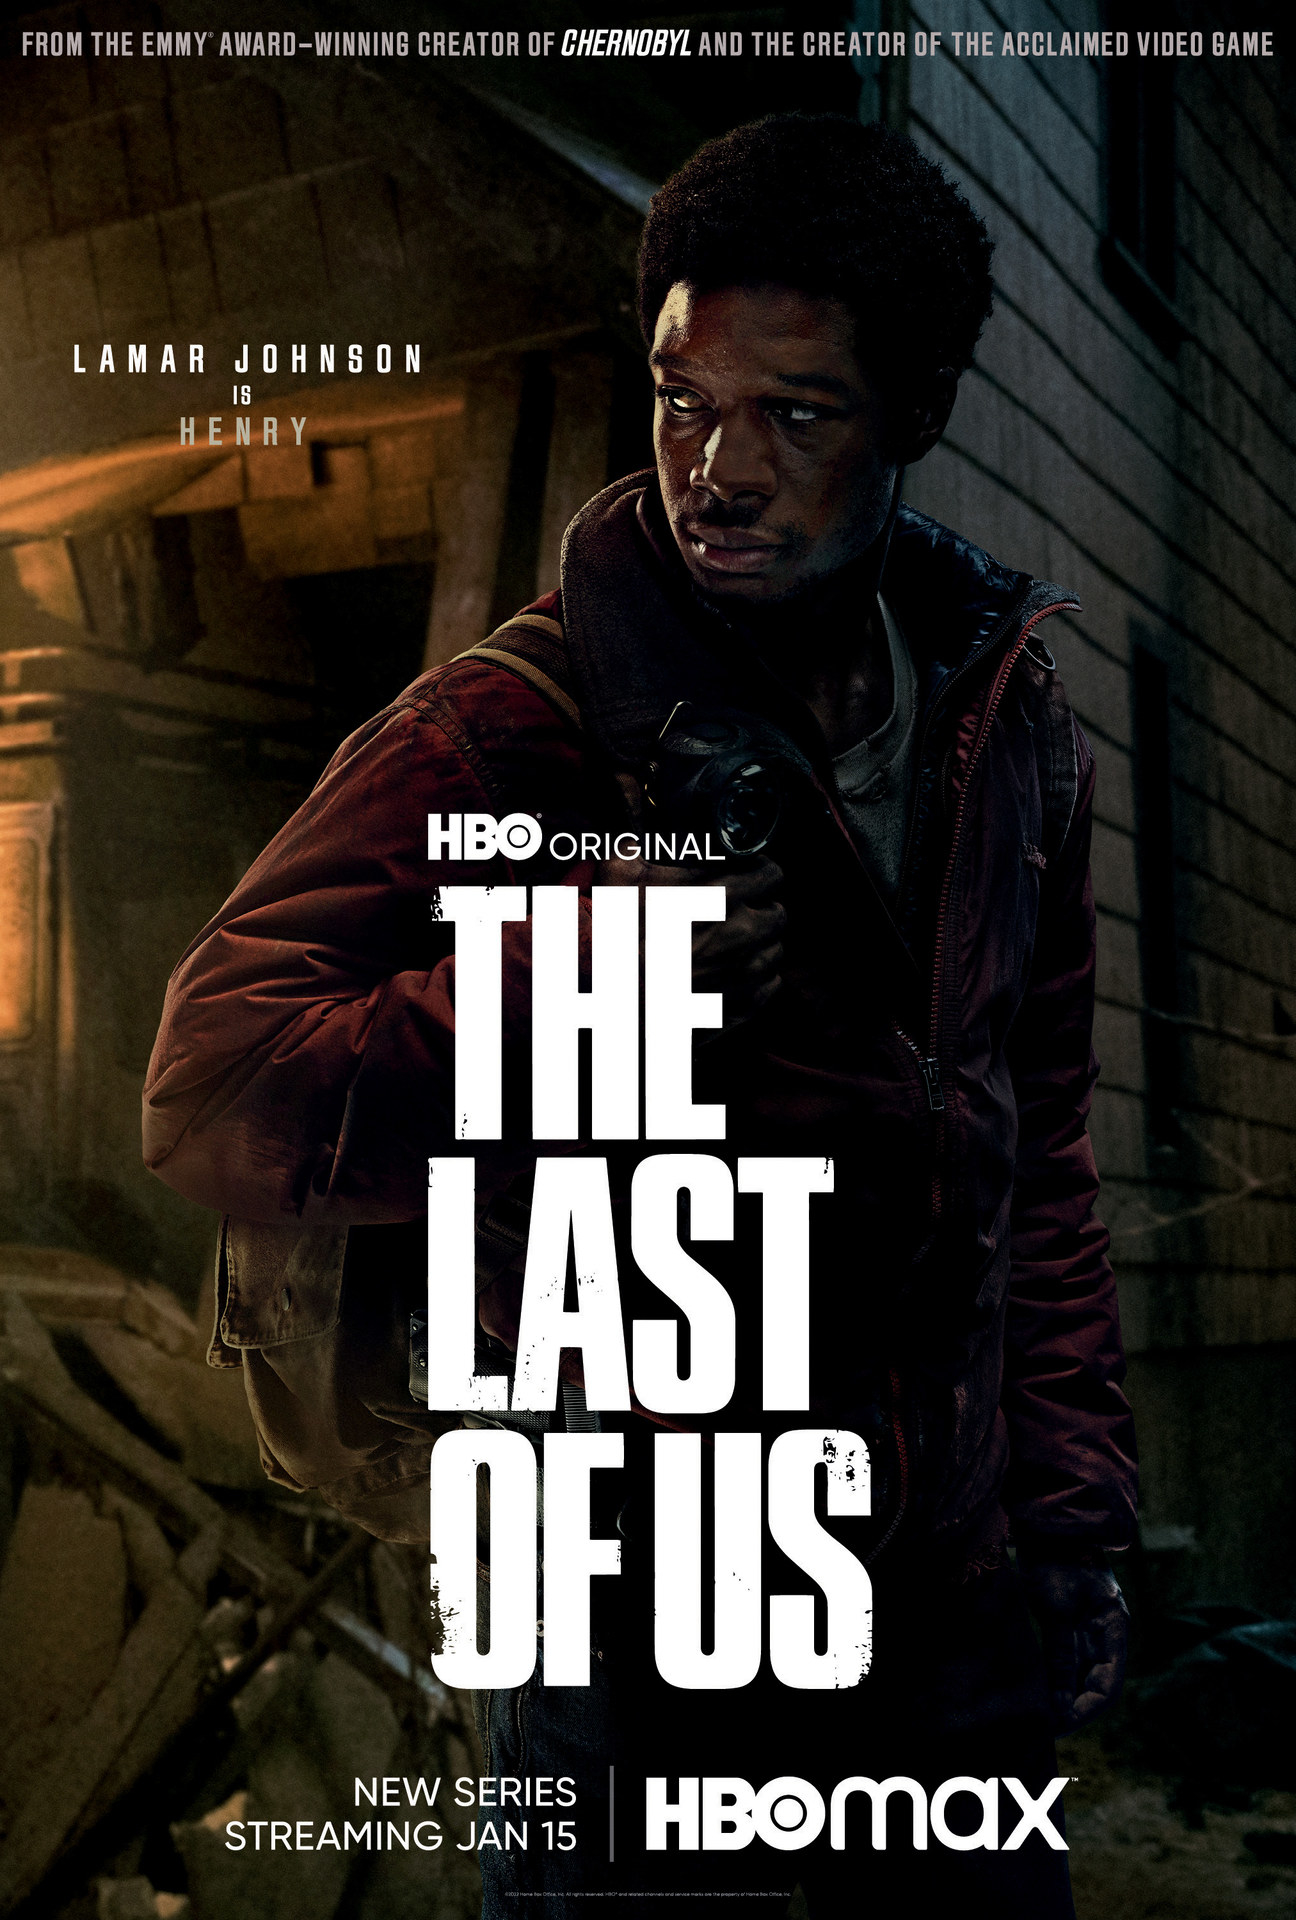 Lamar Johnson as Henry in The Last of Us TV show